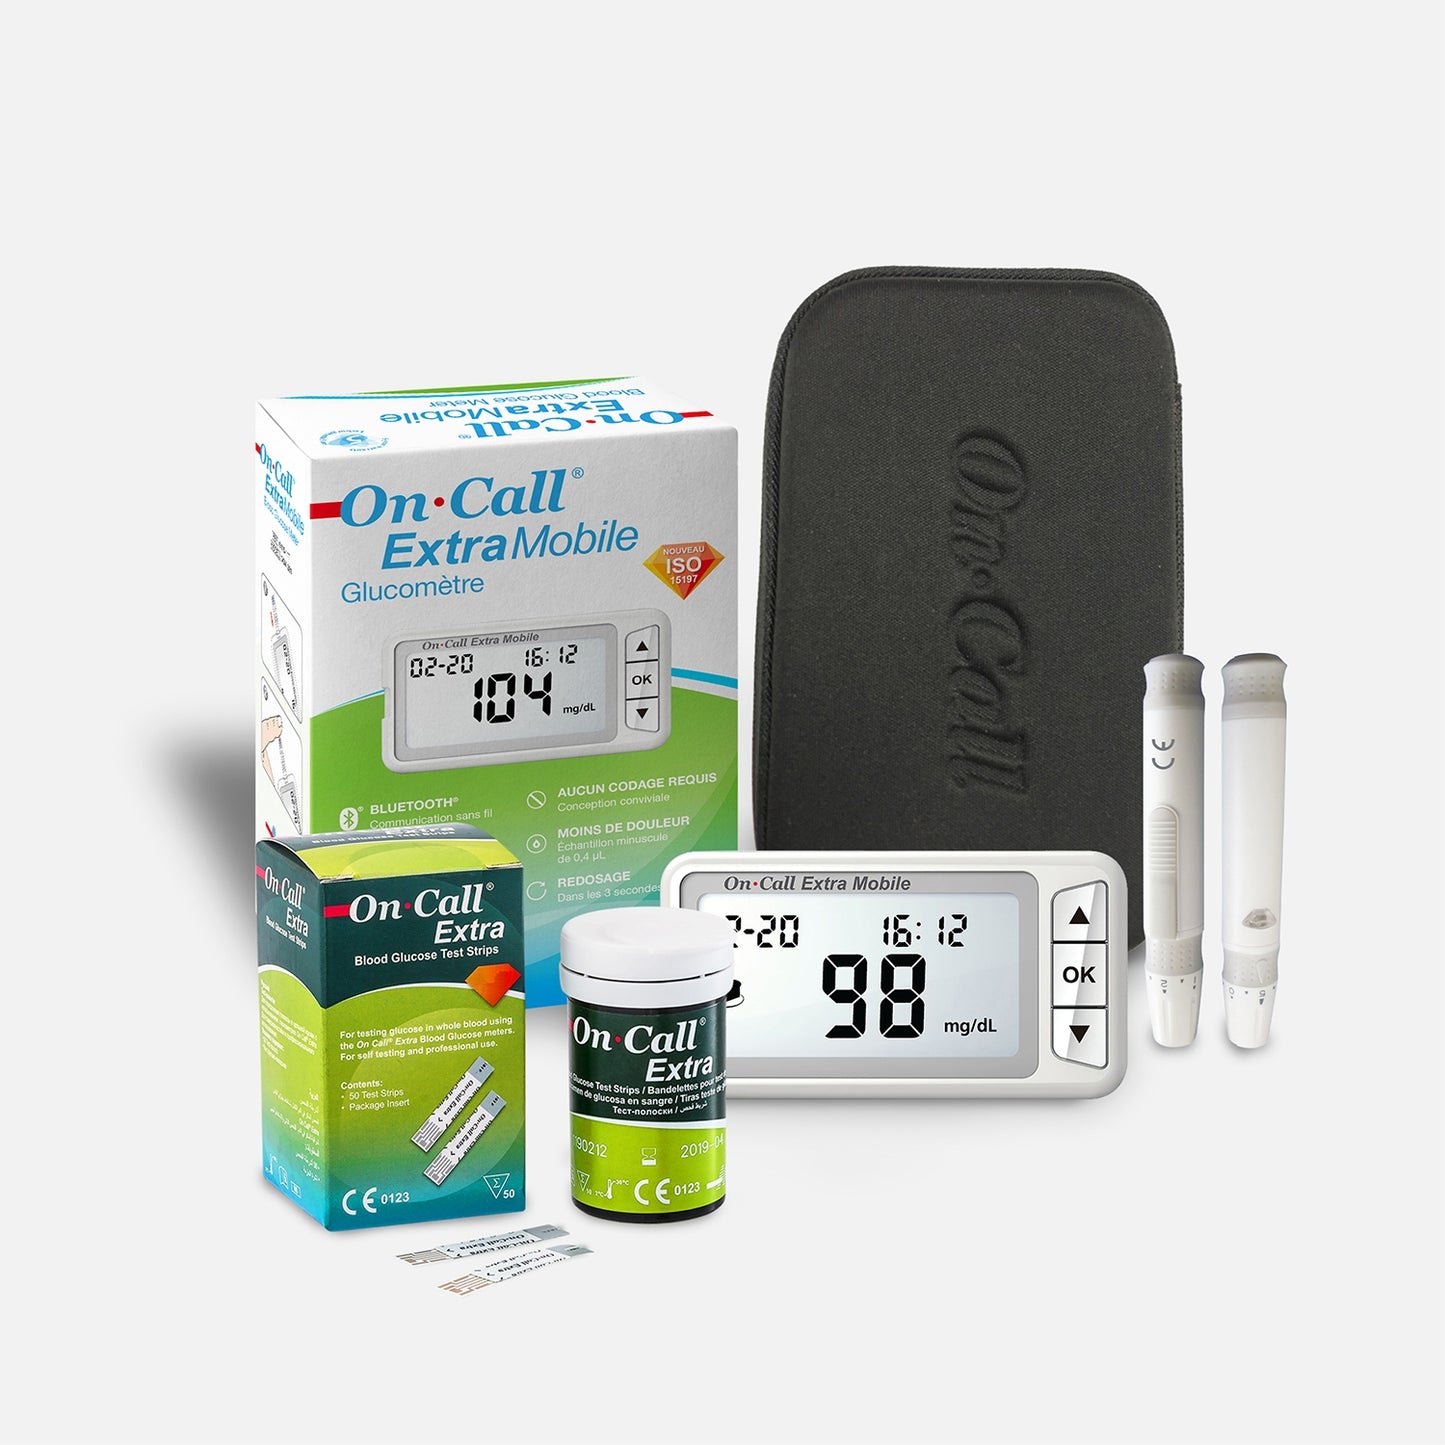 On Call Extra Mobile Blood Glucose Meter